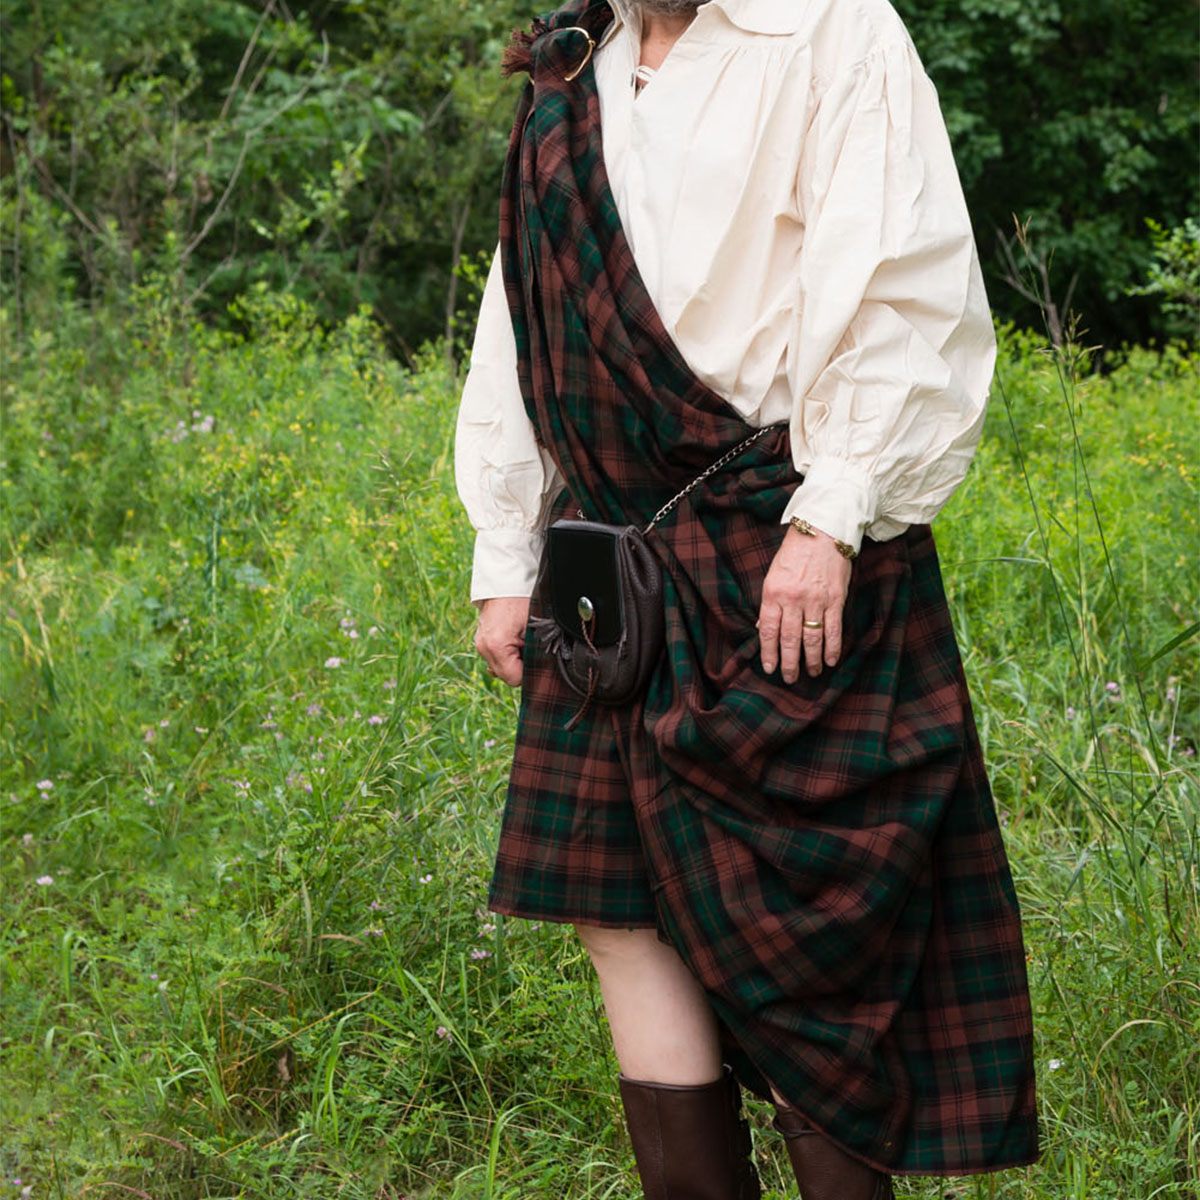 A man in a Great Kilt - Poly/Viscose Wool-Free standing in a field.